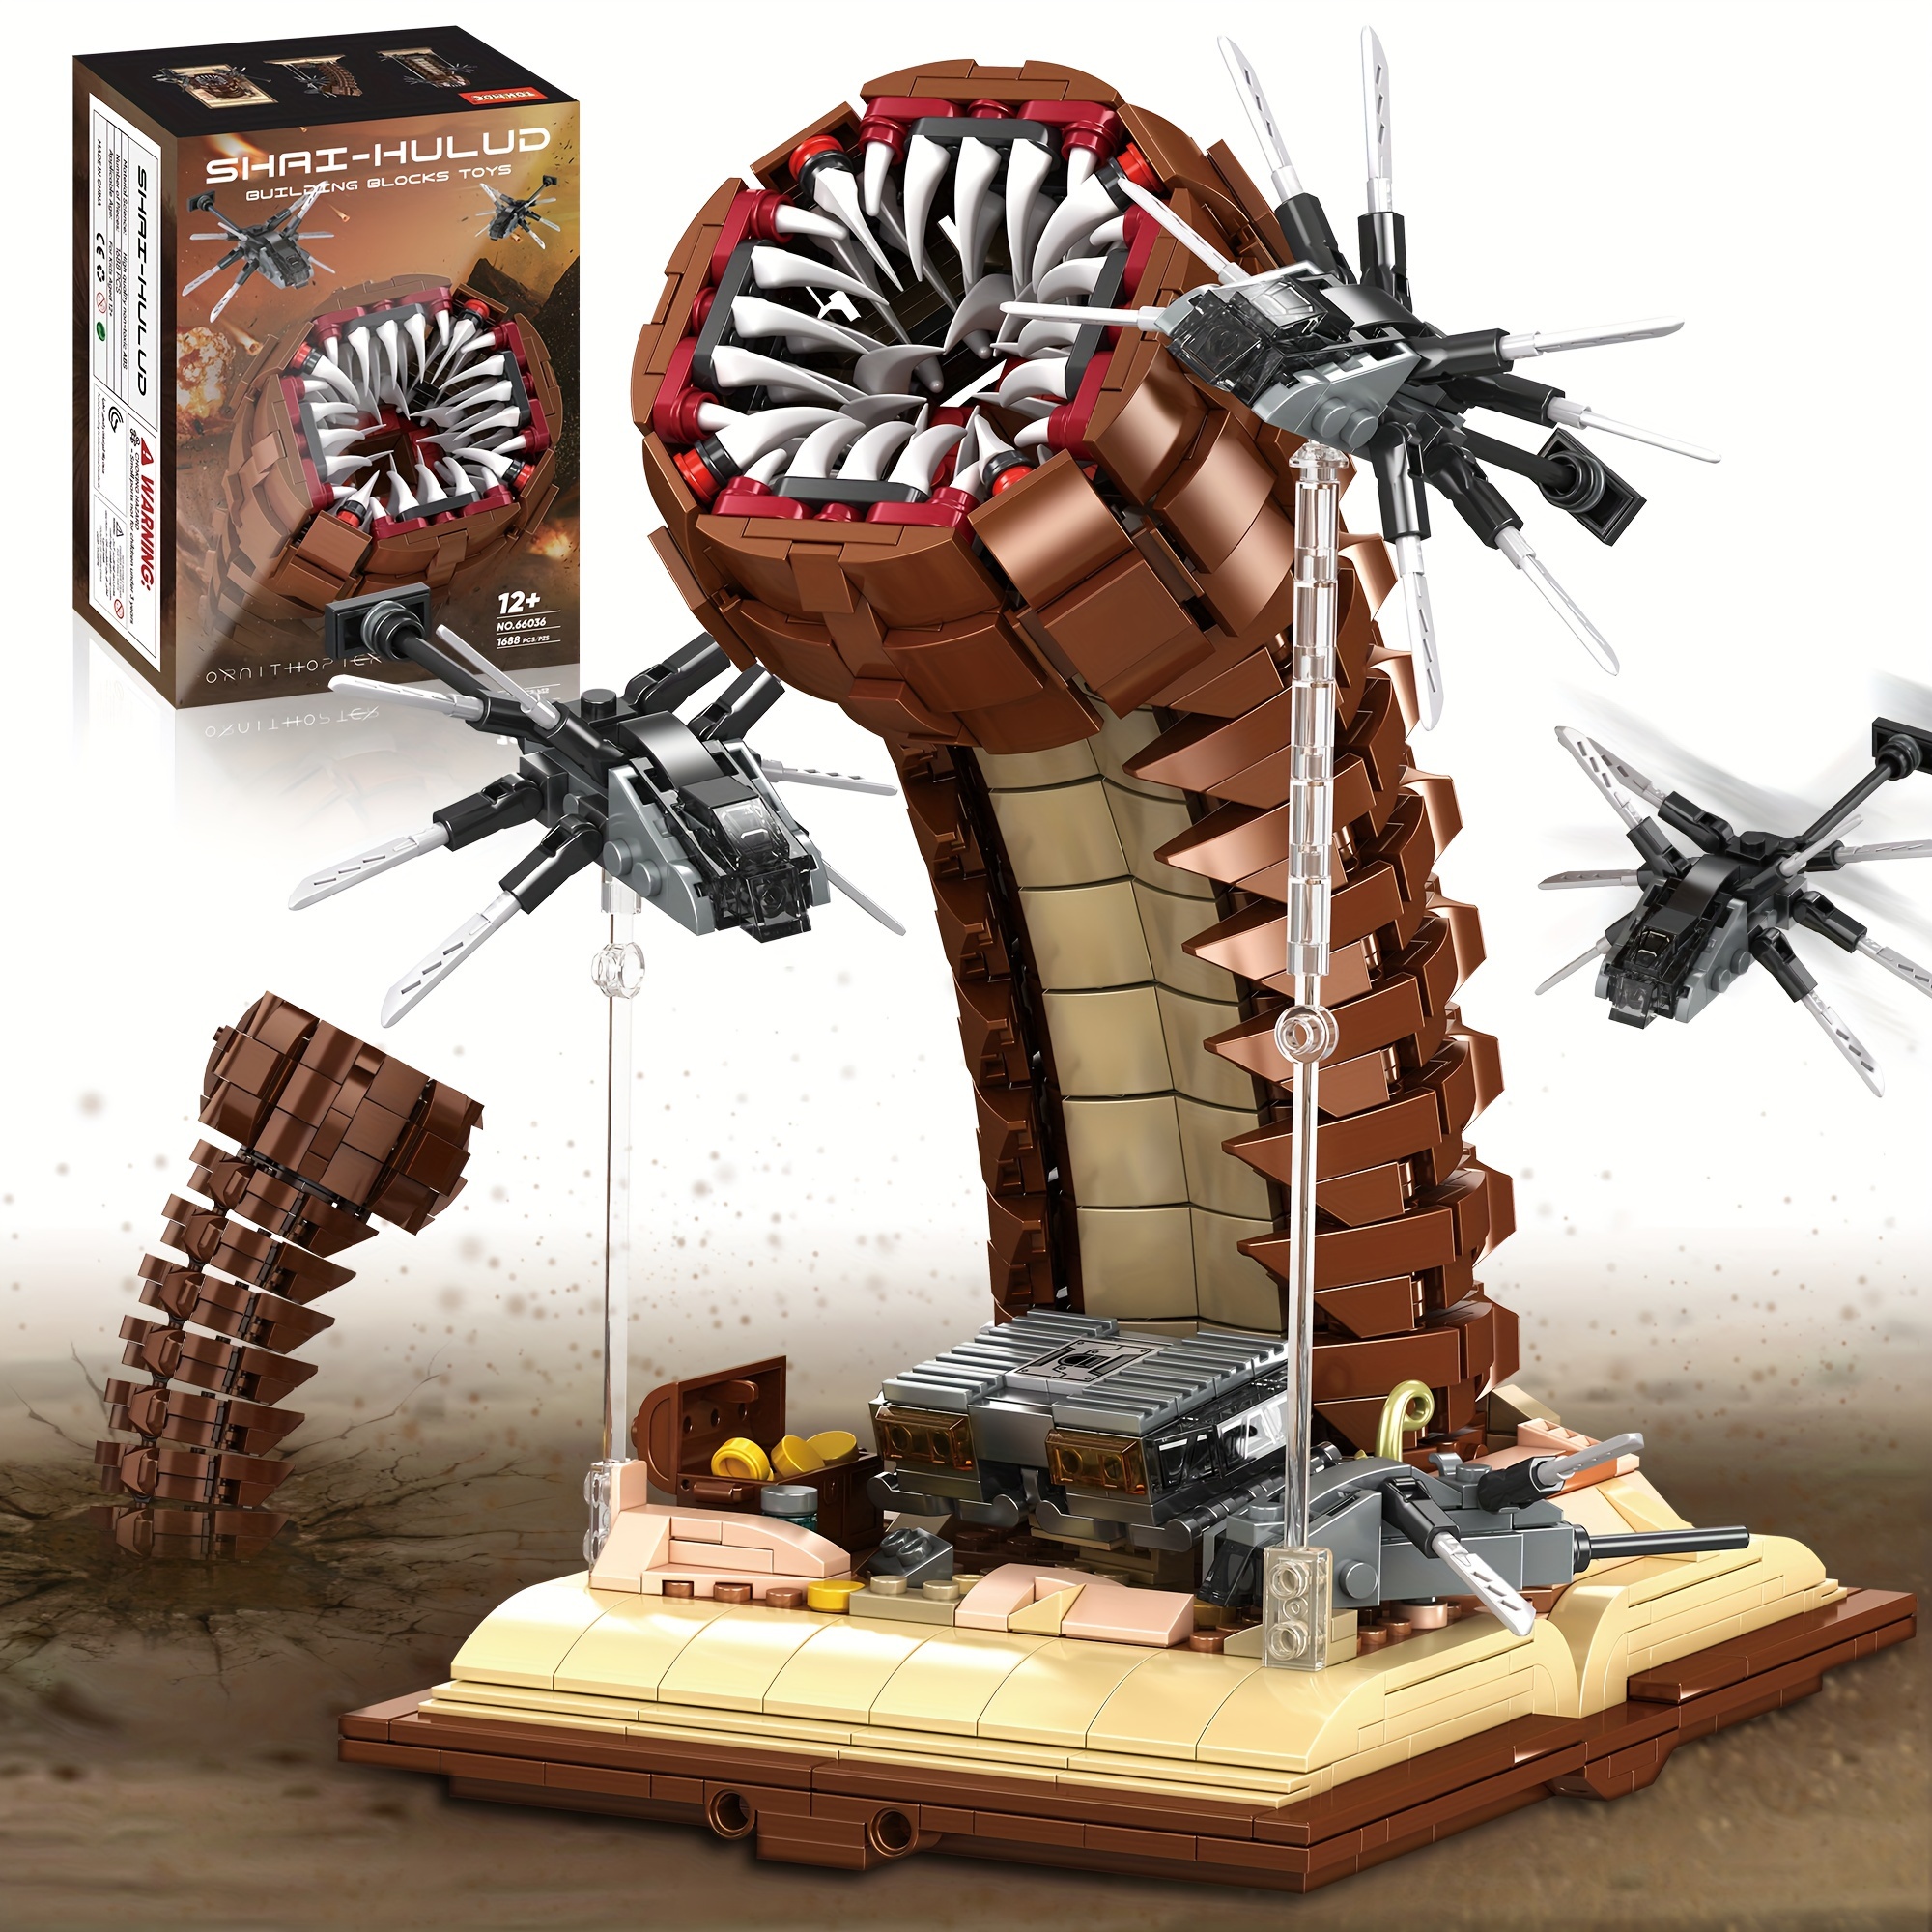 

Sandworm Monster Building Blocks, Equipped With Suspended Ornithopter Building Set Toy, Classic Construction Building Blocks Birthday Gifts For Teens